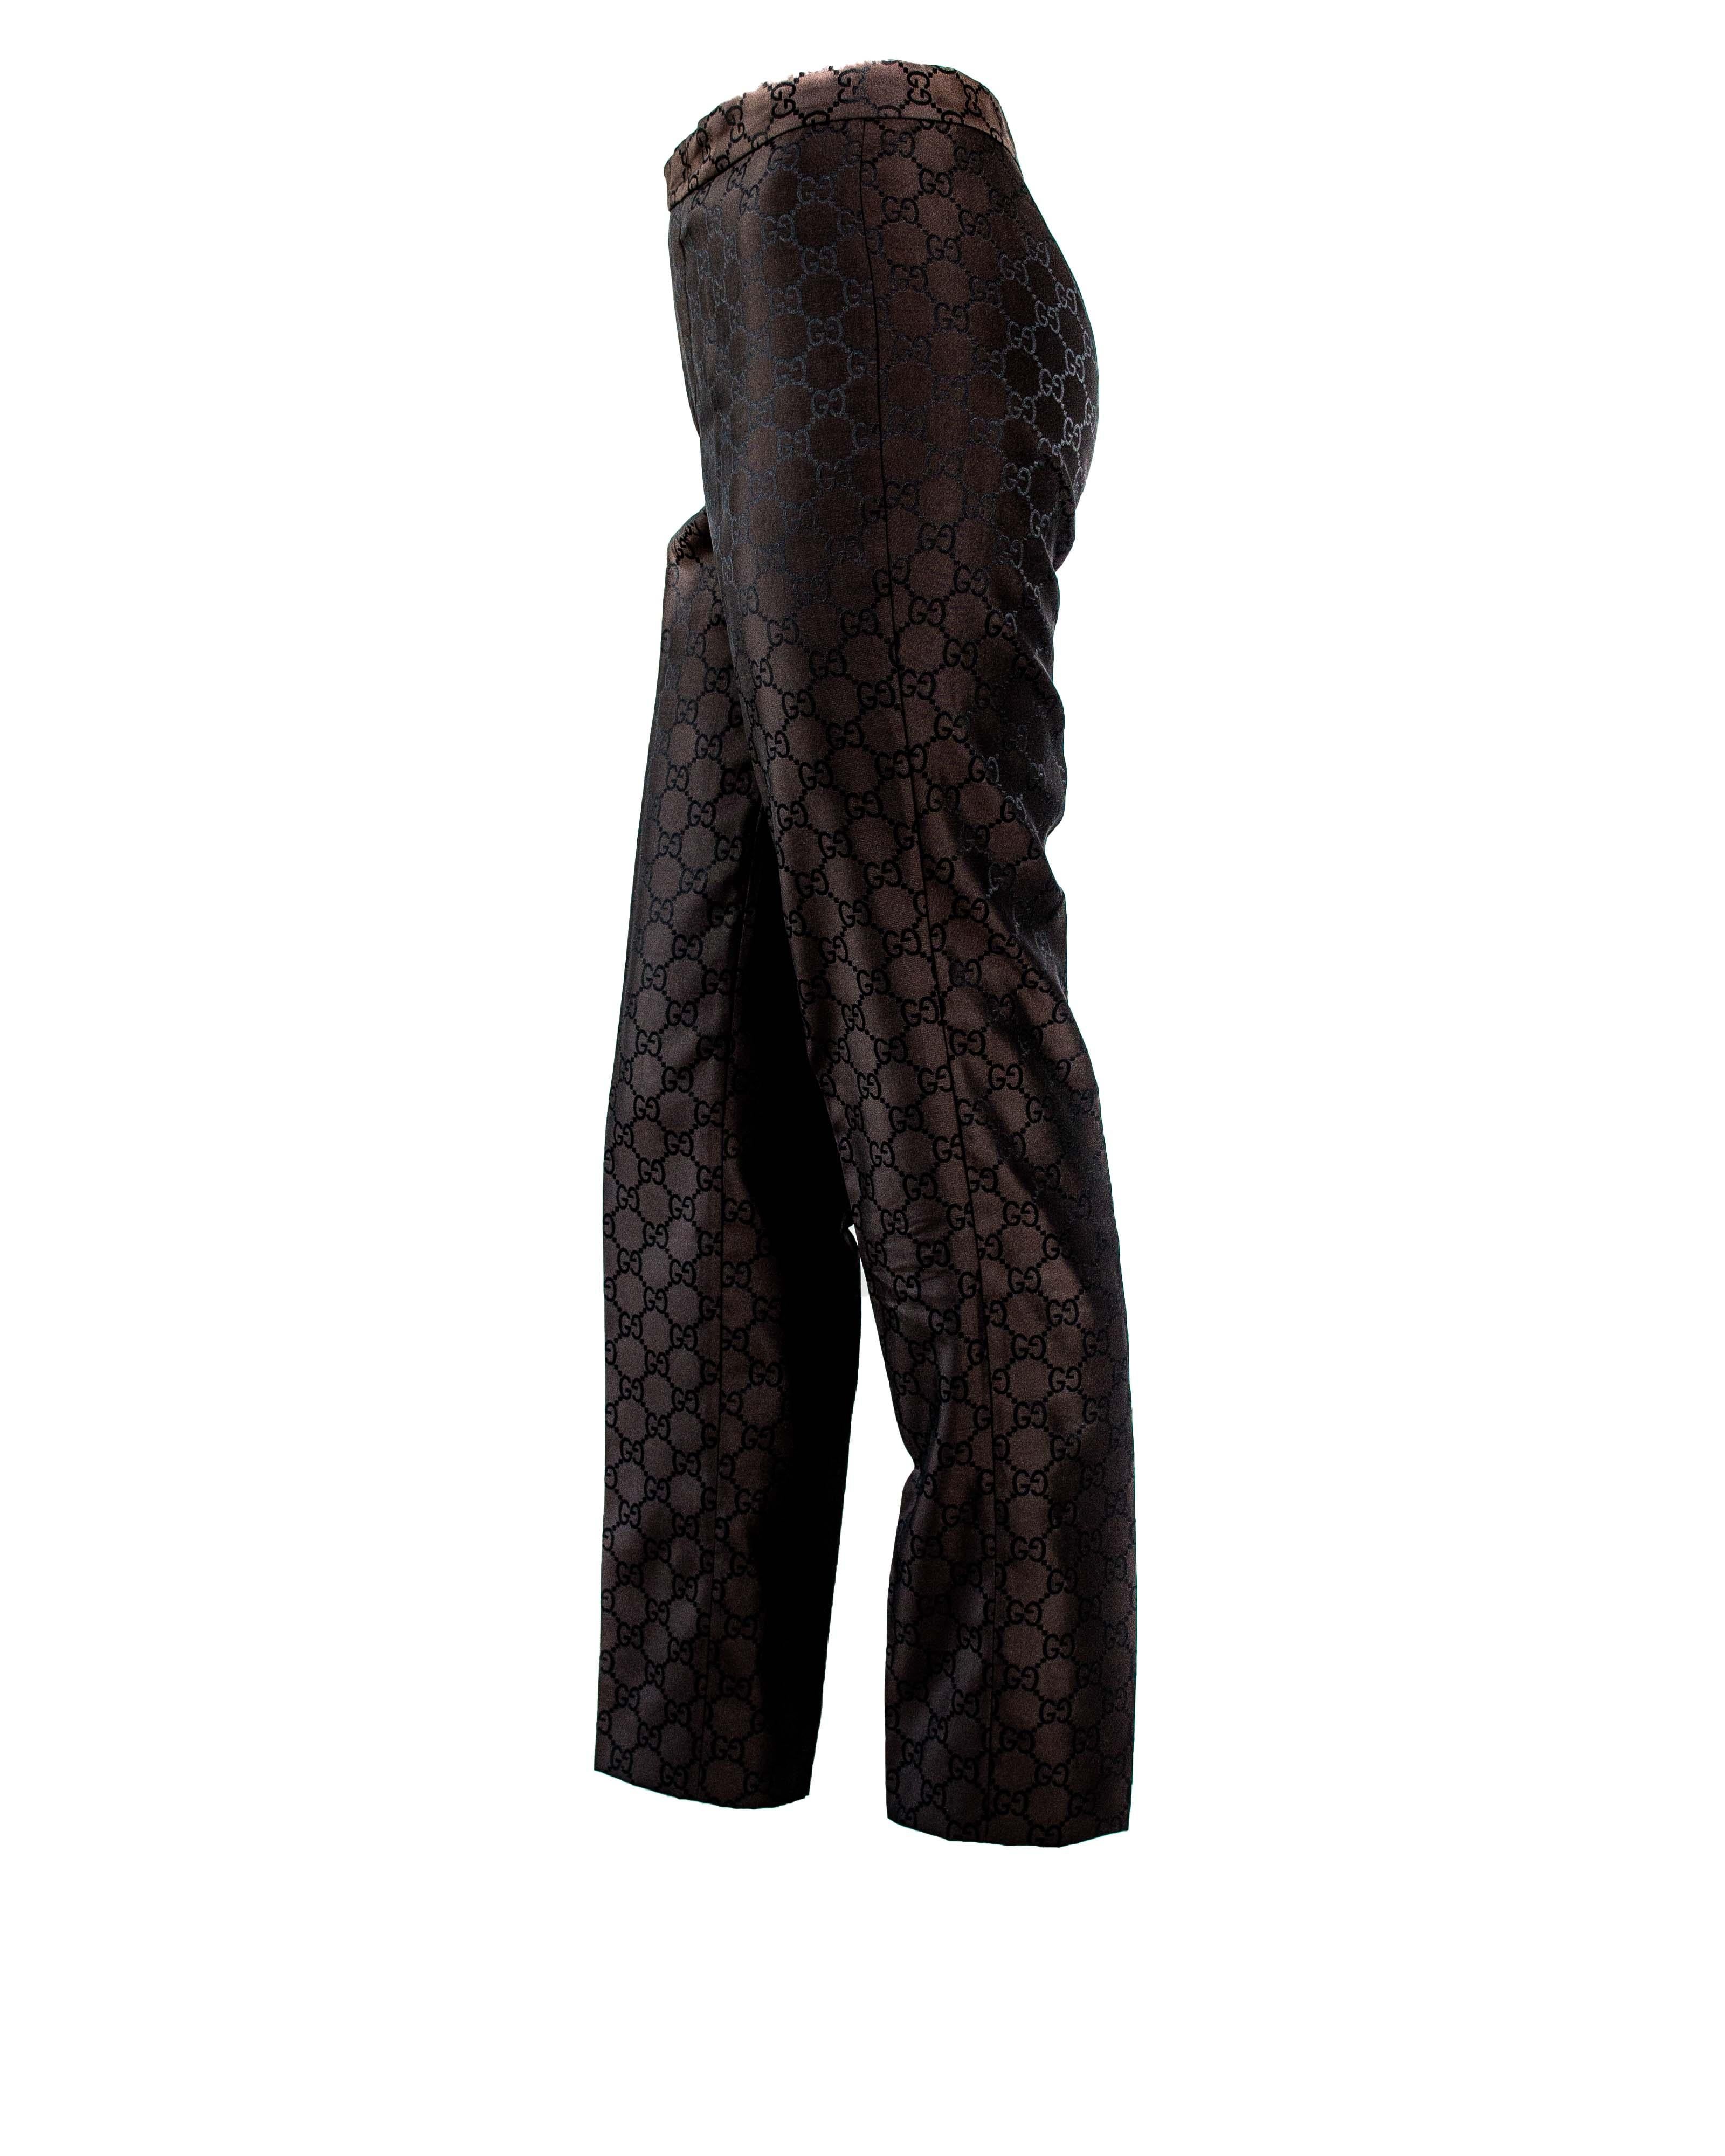 S/S 1998 Gucci by Tom Ford Woven GG Monogram Satin Brown Pantsuit In Good Condition For Sale In West Hollywood, CA